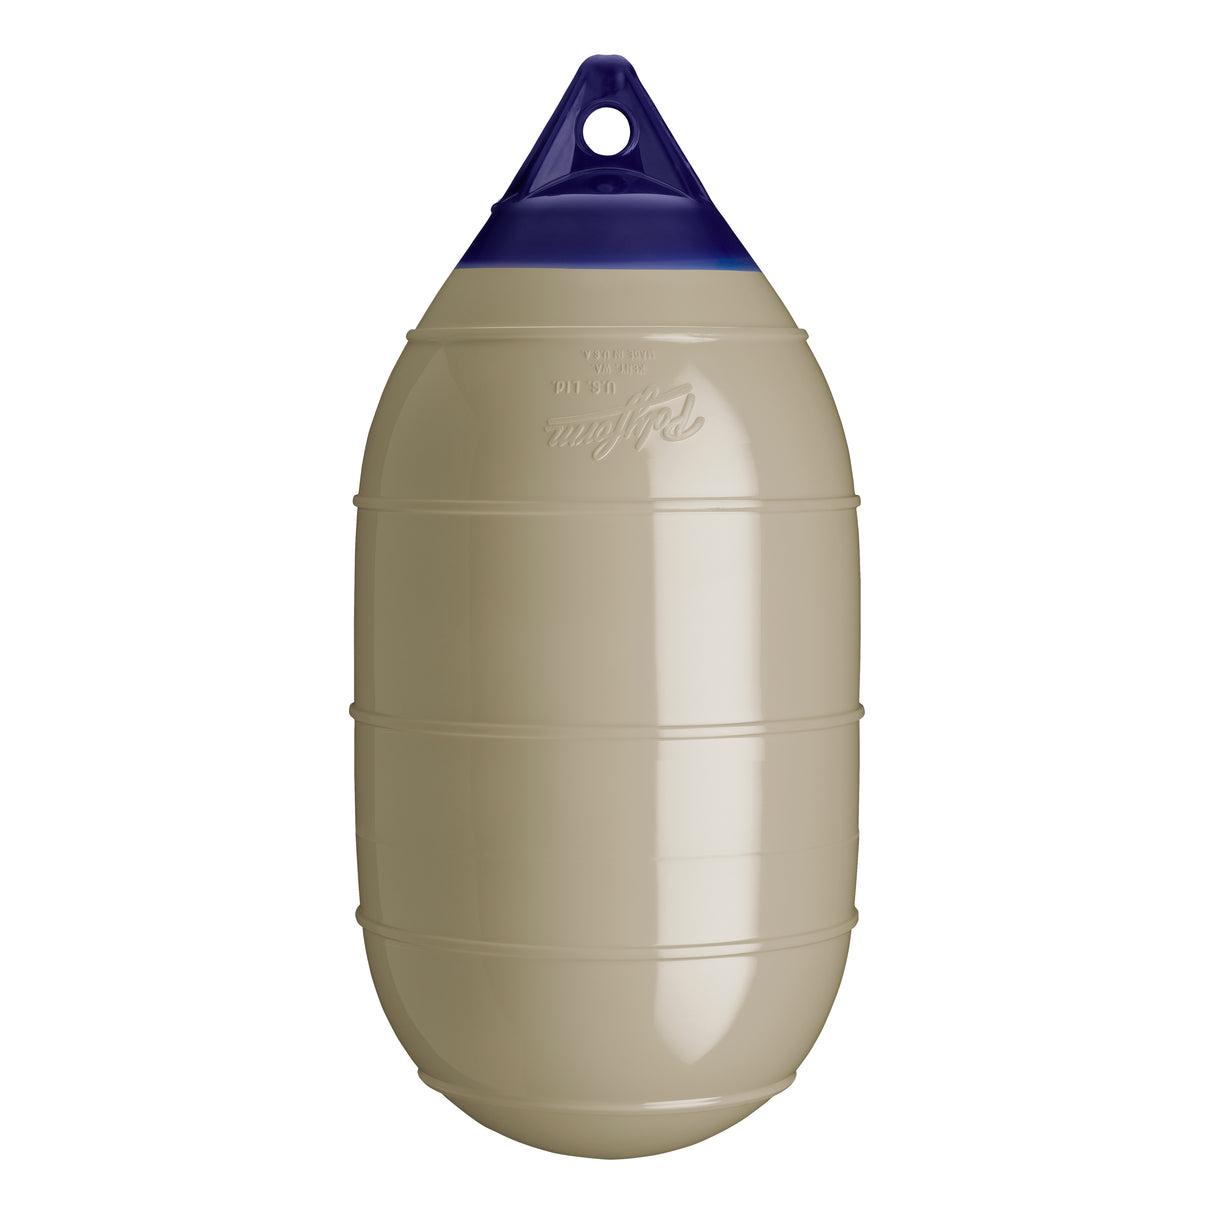 Sand inflatable low drag buoy, Polyform LD-2 